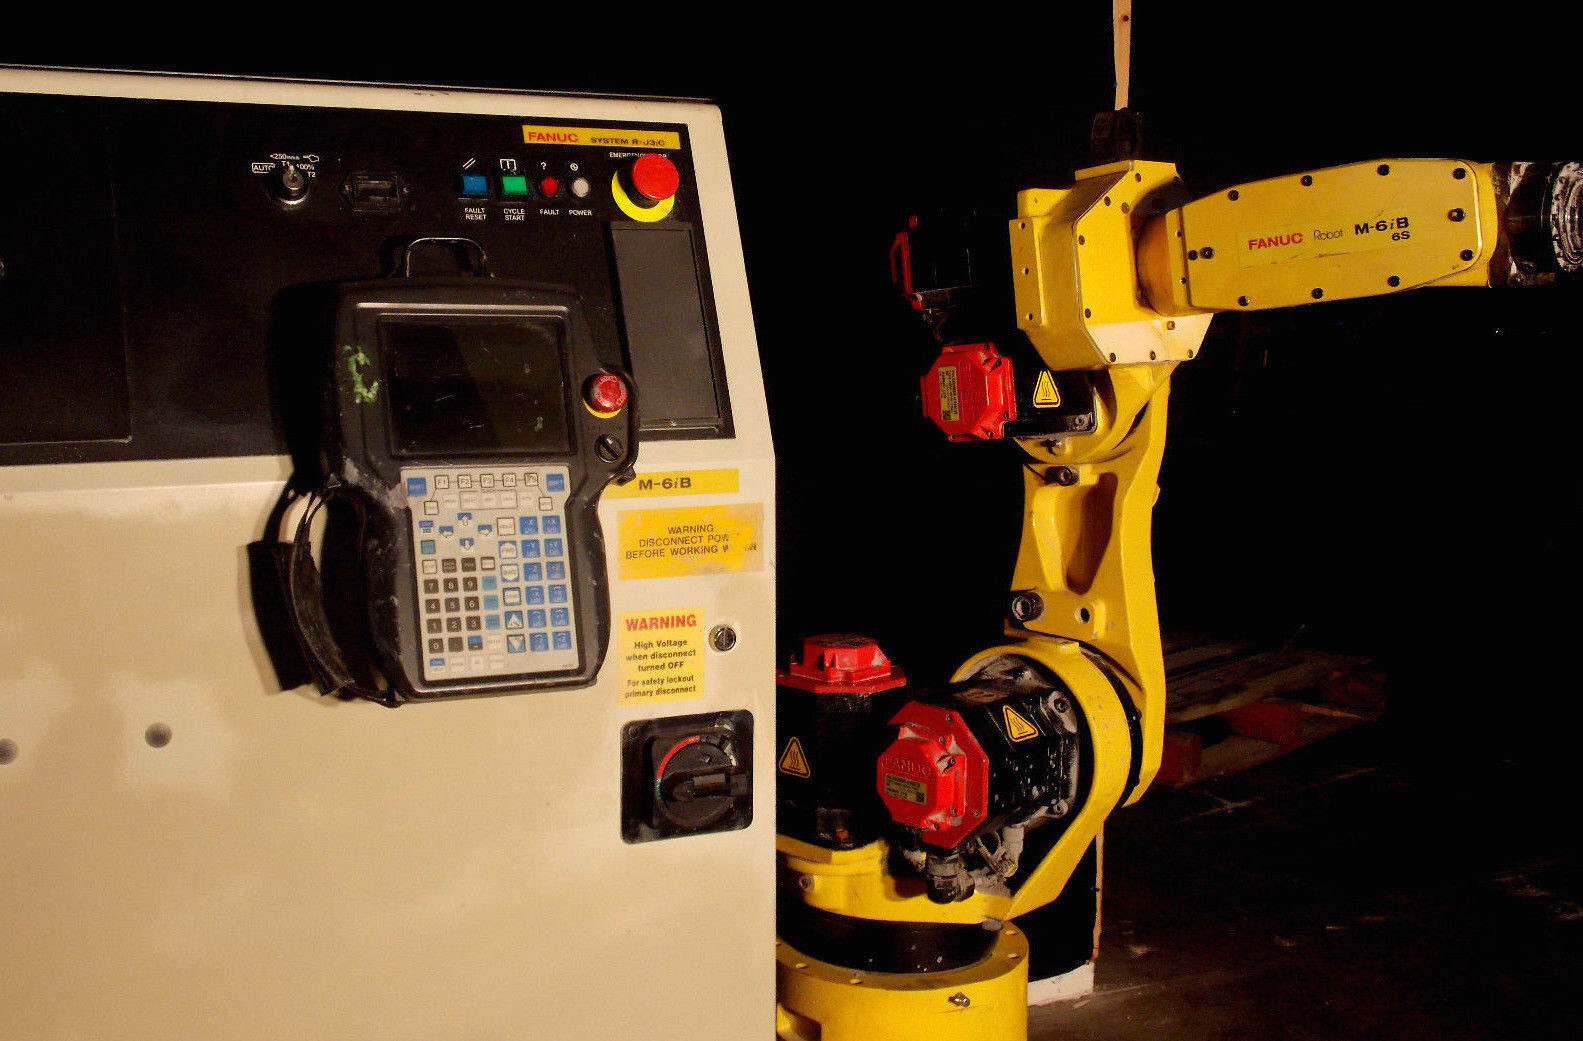  Fanuc M6iB /6S Robot with Rj3iC Control Low Hours Tested Industrial Robotic